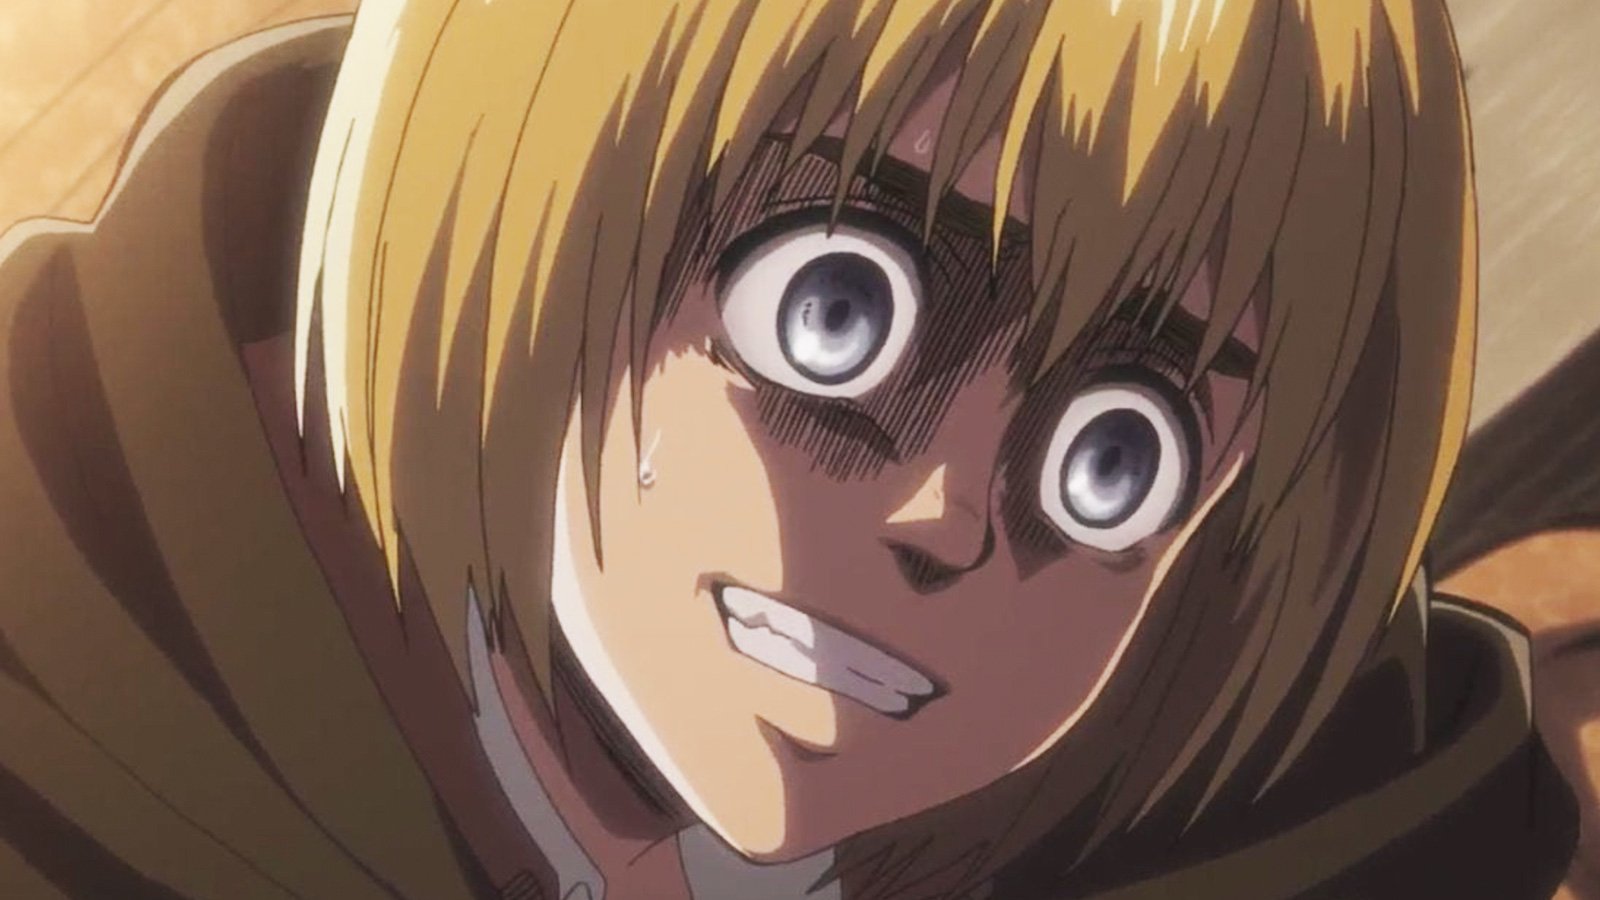 Attack on Titan fans furious over anime